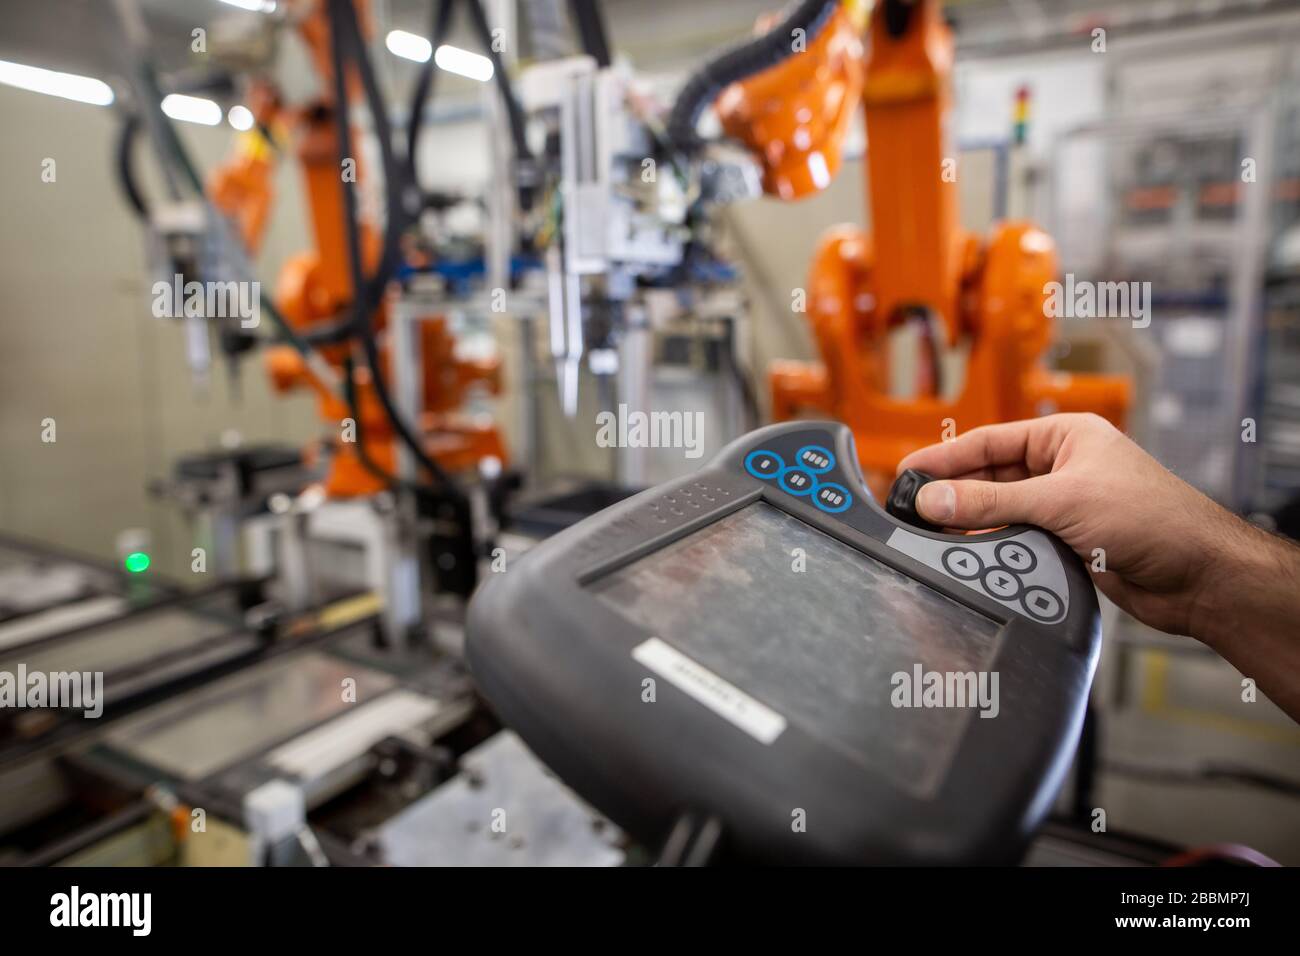 Young man programming industrial automatic robot in automotive industry Stock Photo